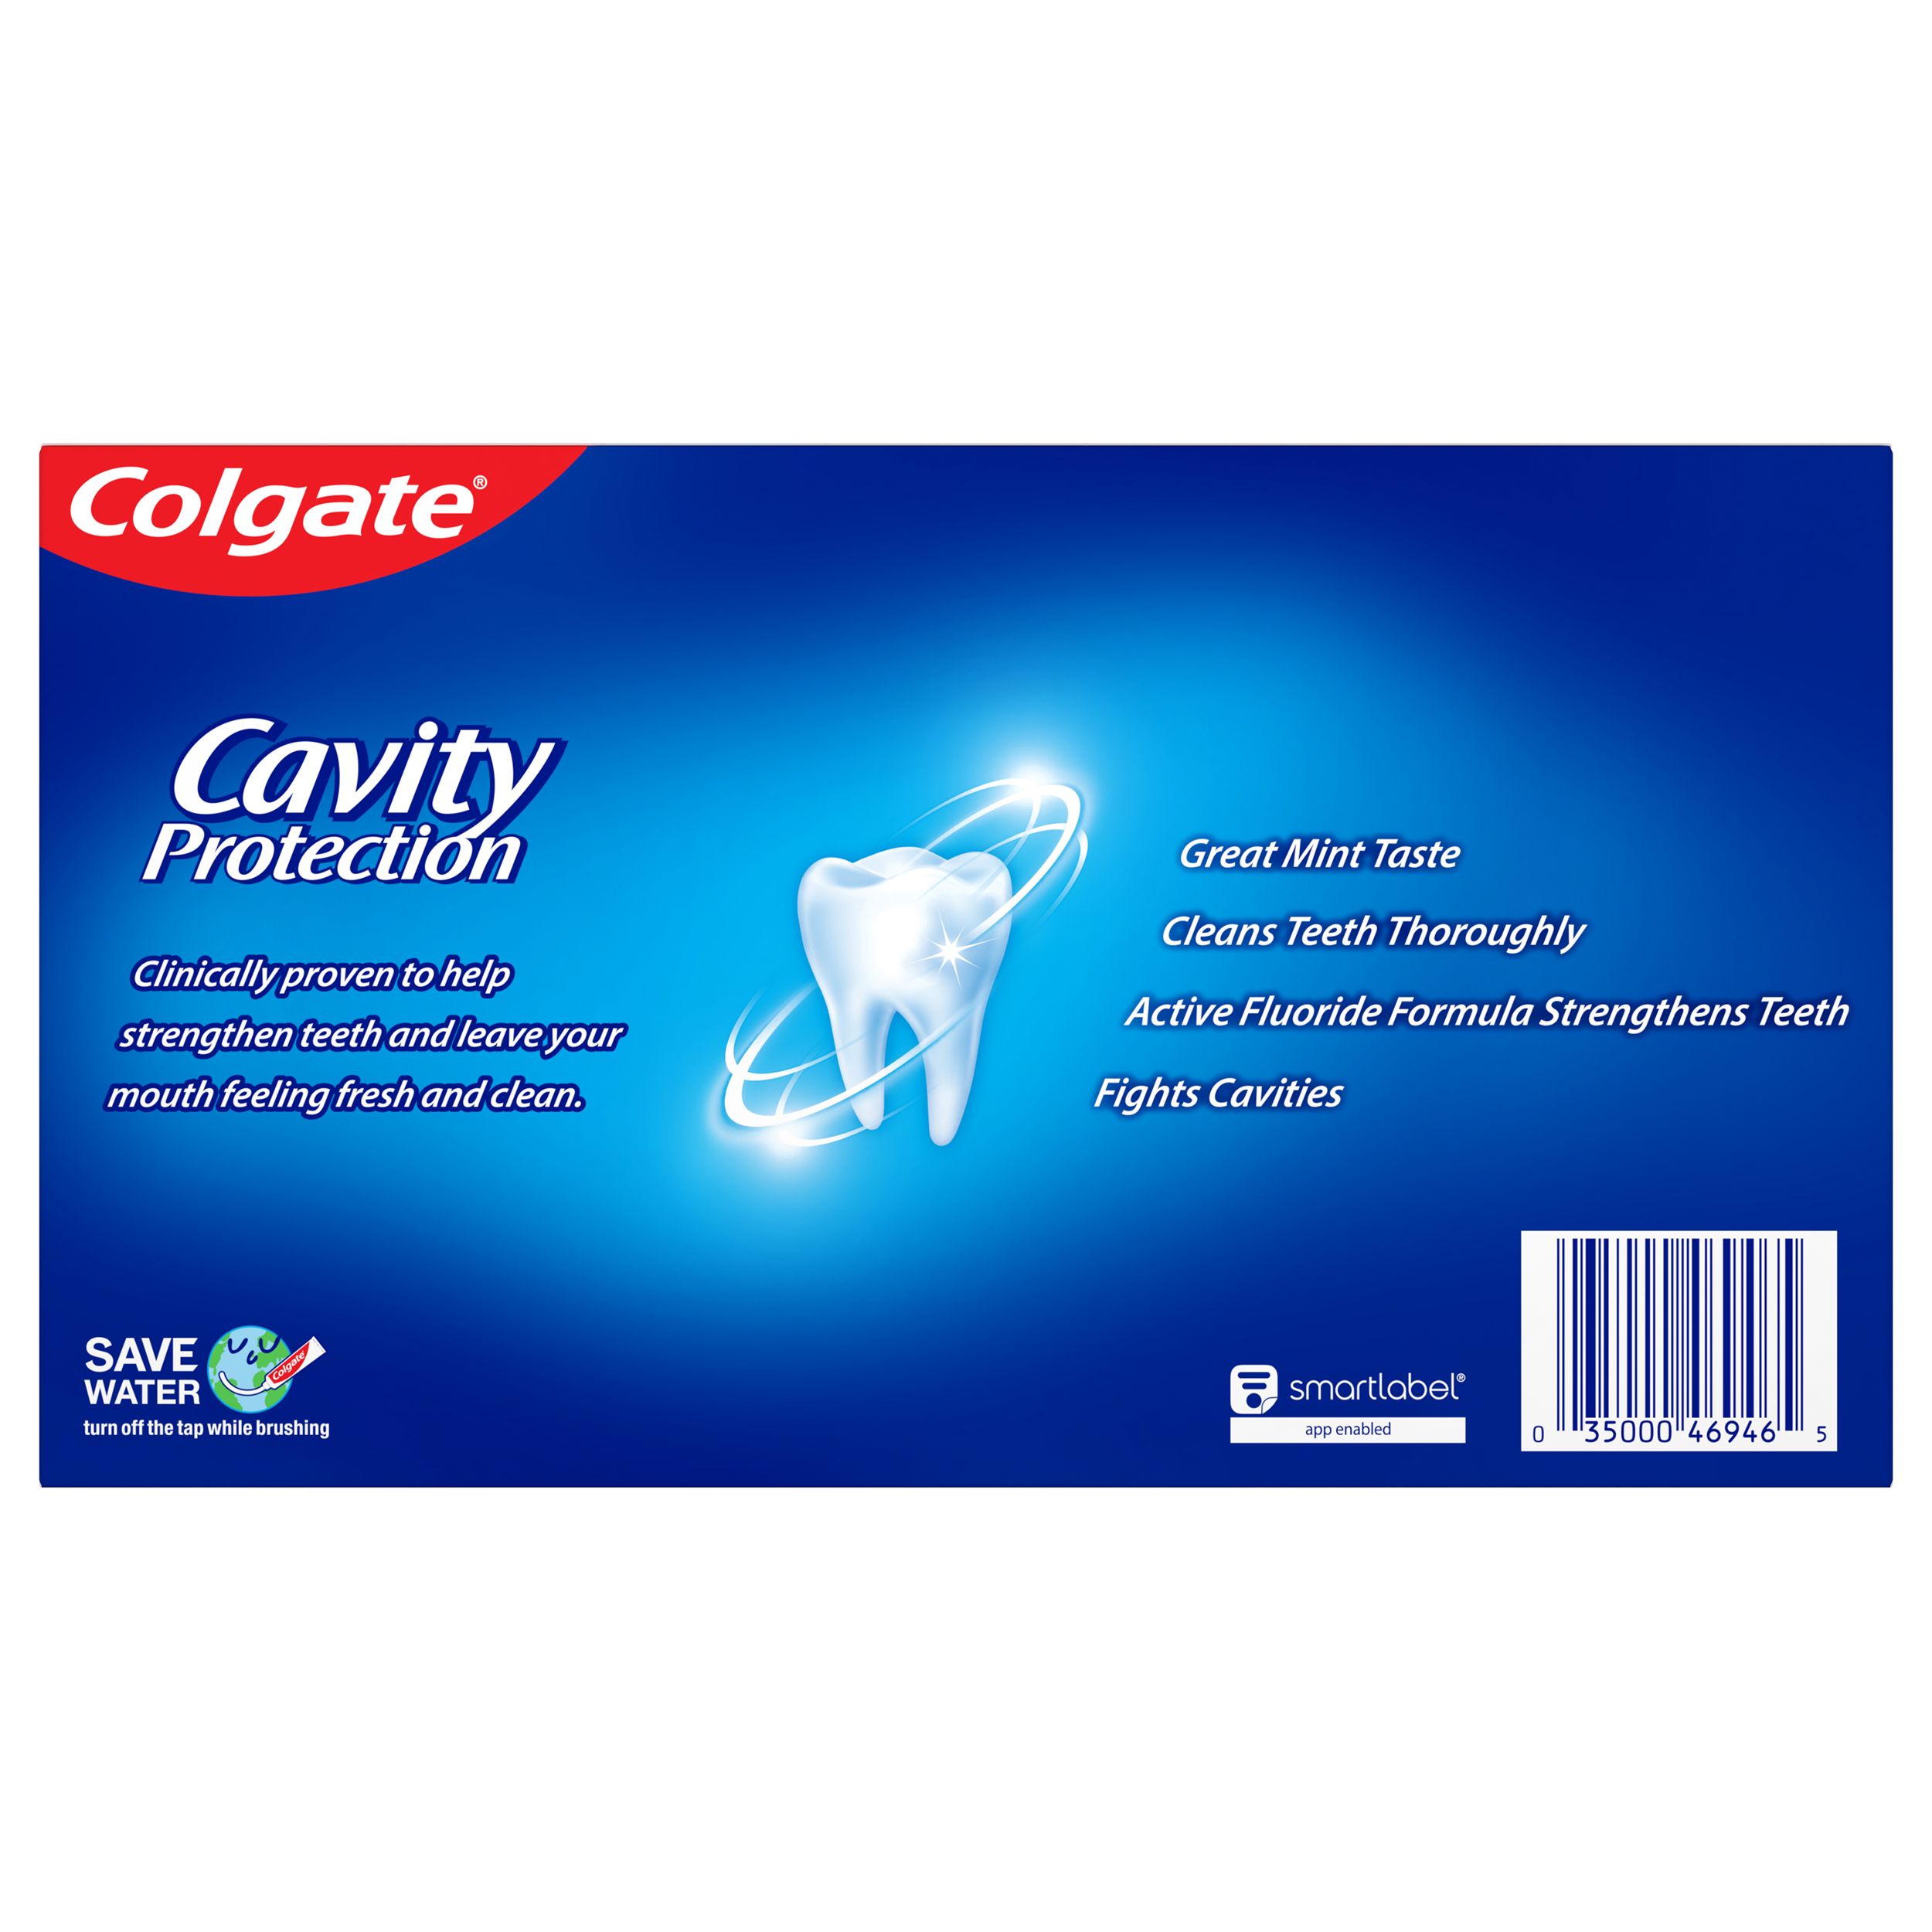 Colgate Cavity Protection Toothpaste, Great Regular Flavor, 6 Oz, 3 Pack - image 8 of 9